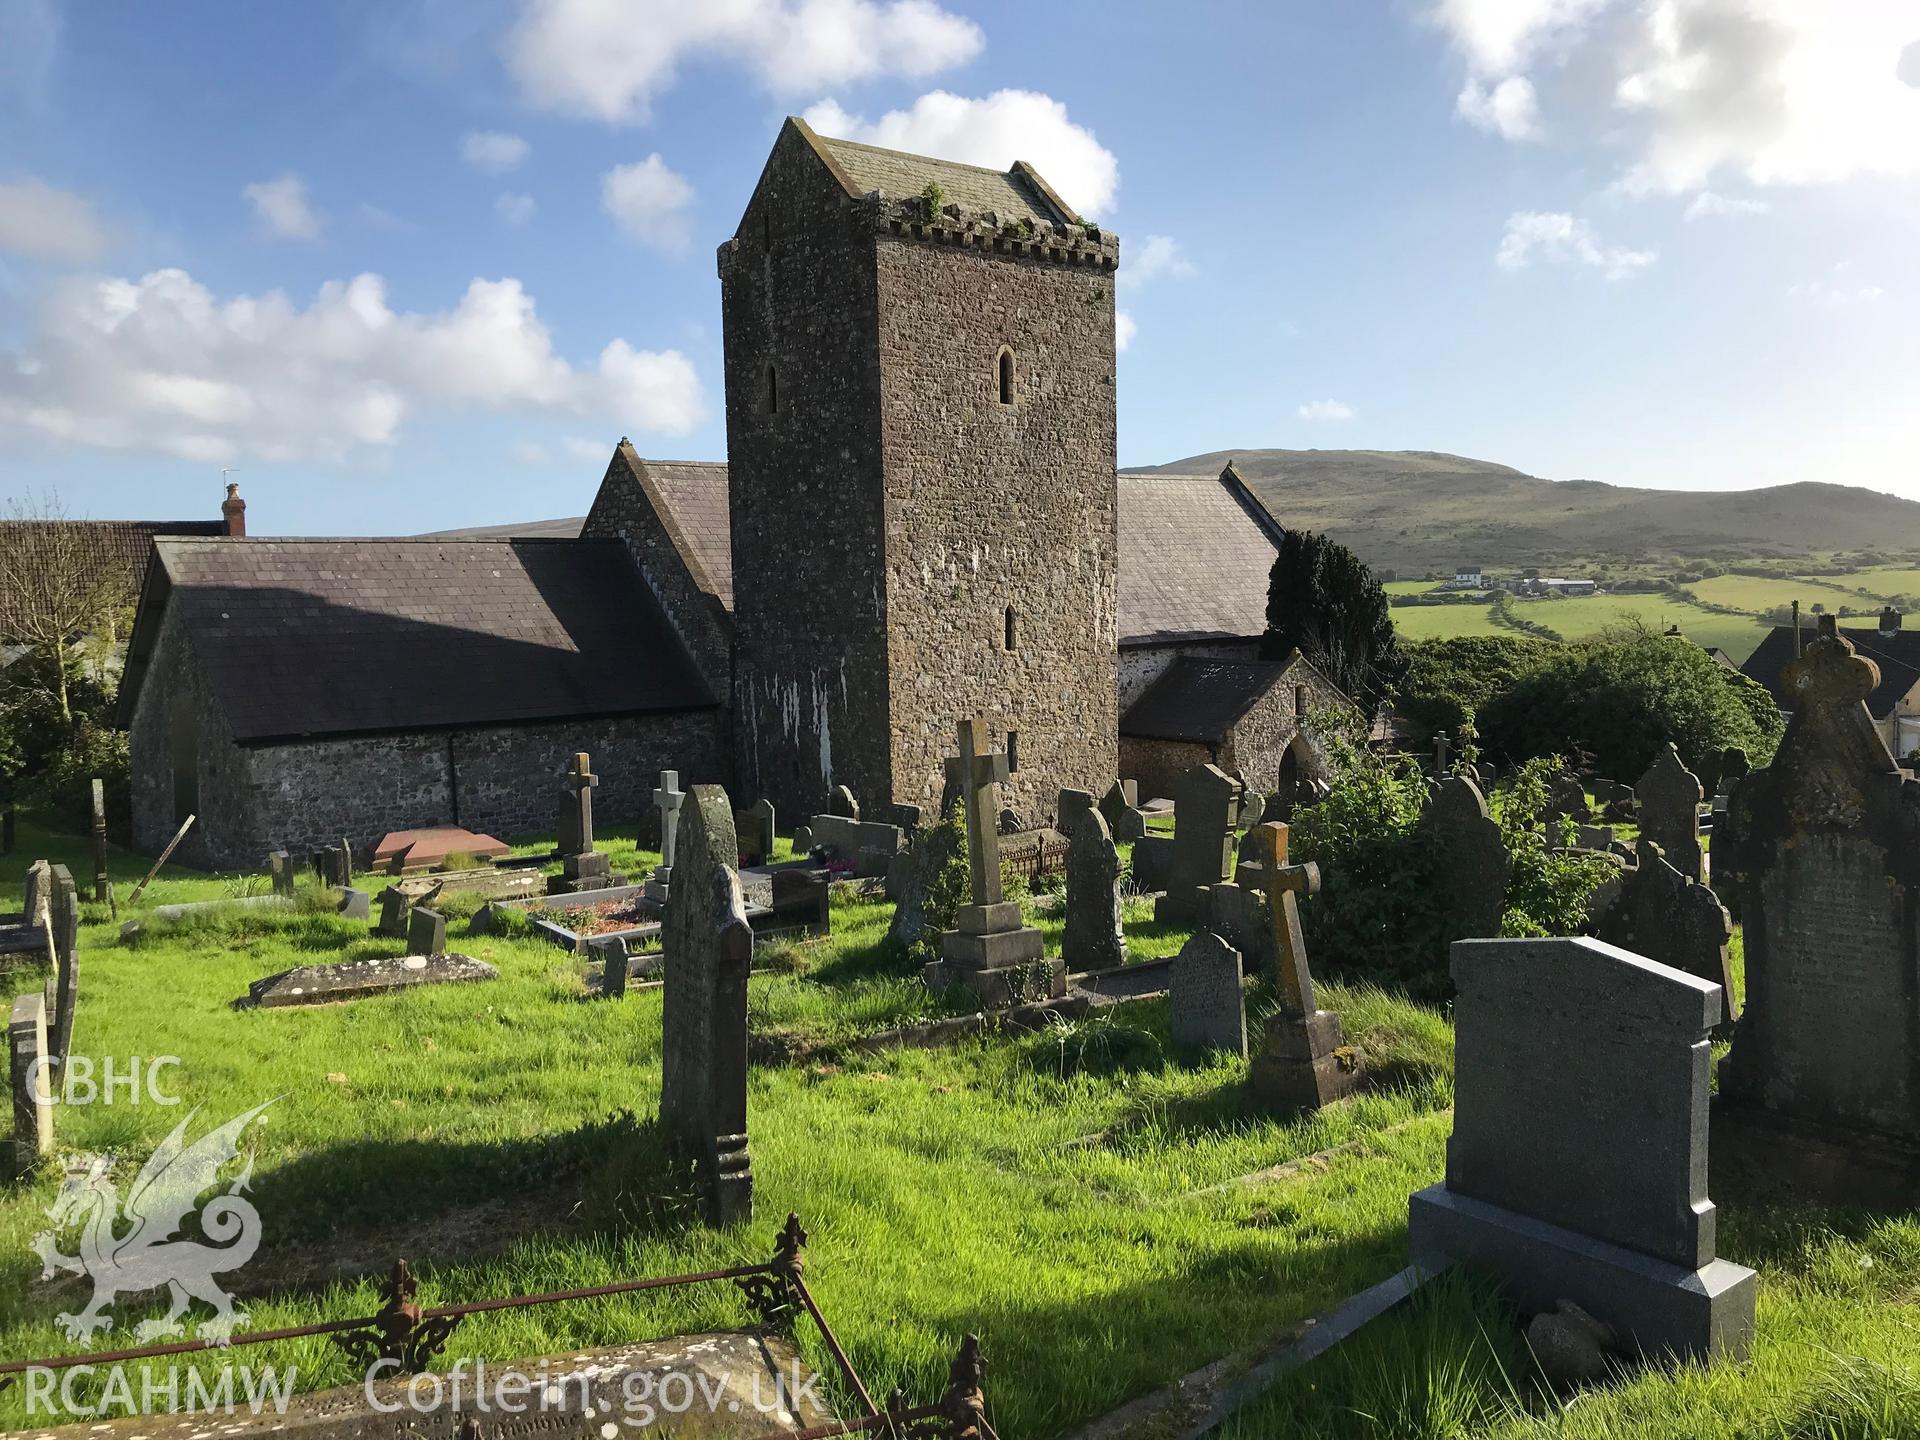 Colour photo showing external view of St. Cenydd's Church and graveyard, Llangenydd, taken by Paul R. Davis, 10th May 2018.